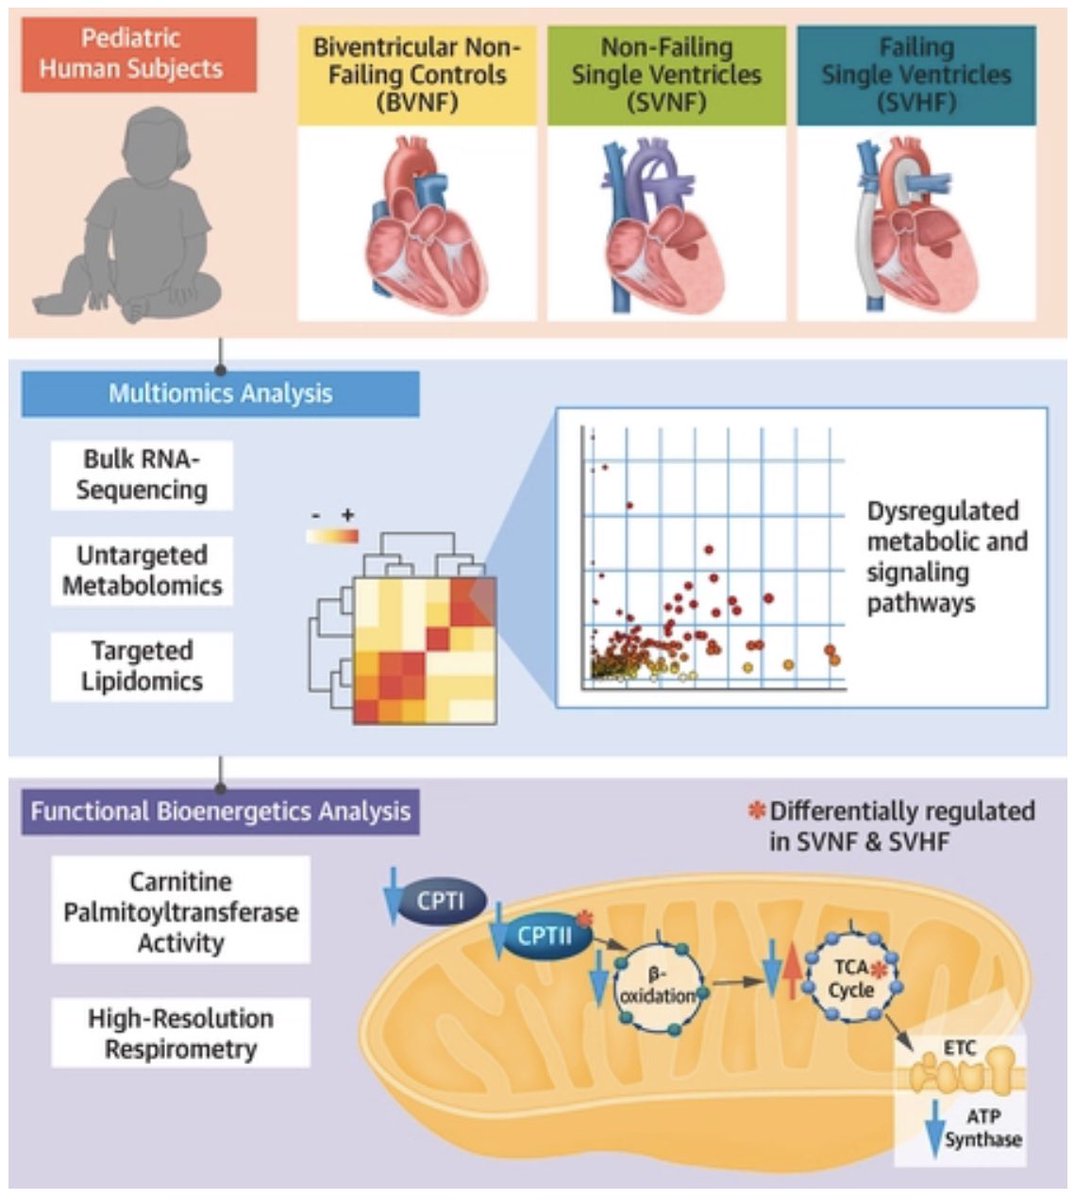 So excited to see this in print! Check out our latest paper in @JACCJournals detailing cardiac transcriptome remodeling and impaired bioenergetics in single ventricle congenital heart disease - @CUCardiology @CUMedicalSchool @CUAnschutz @ChildrensColo - jacc.org/doi/10.1016/j.…